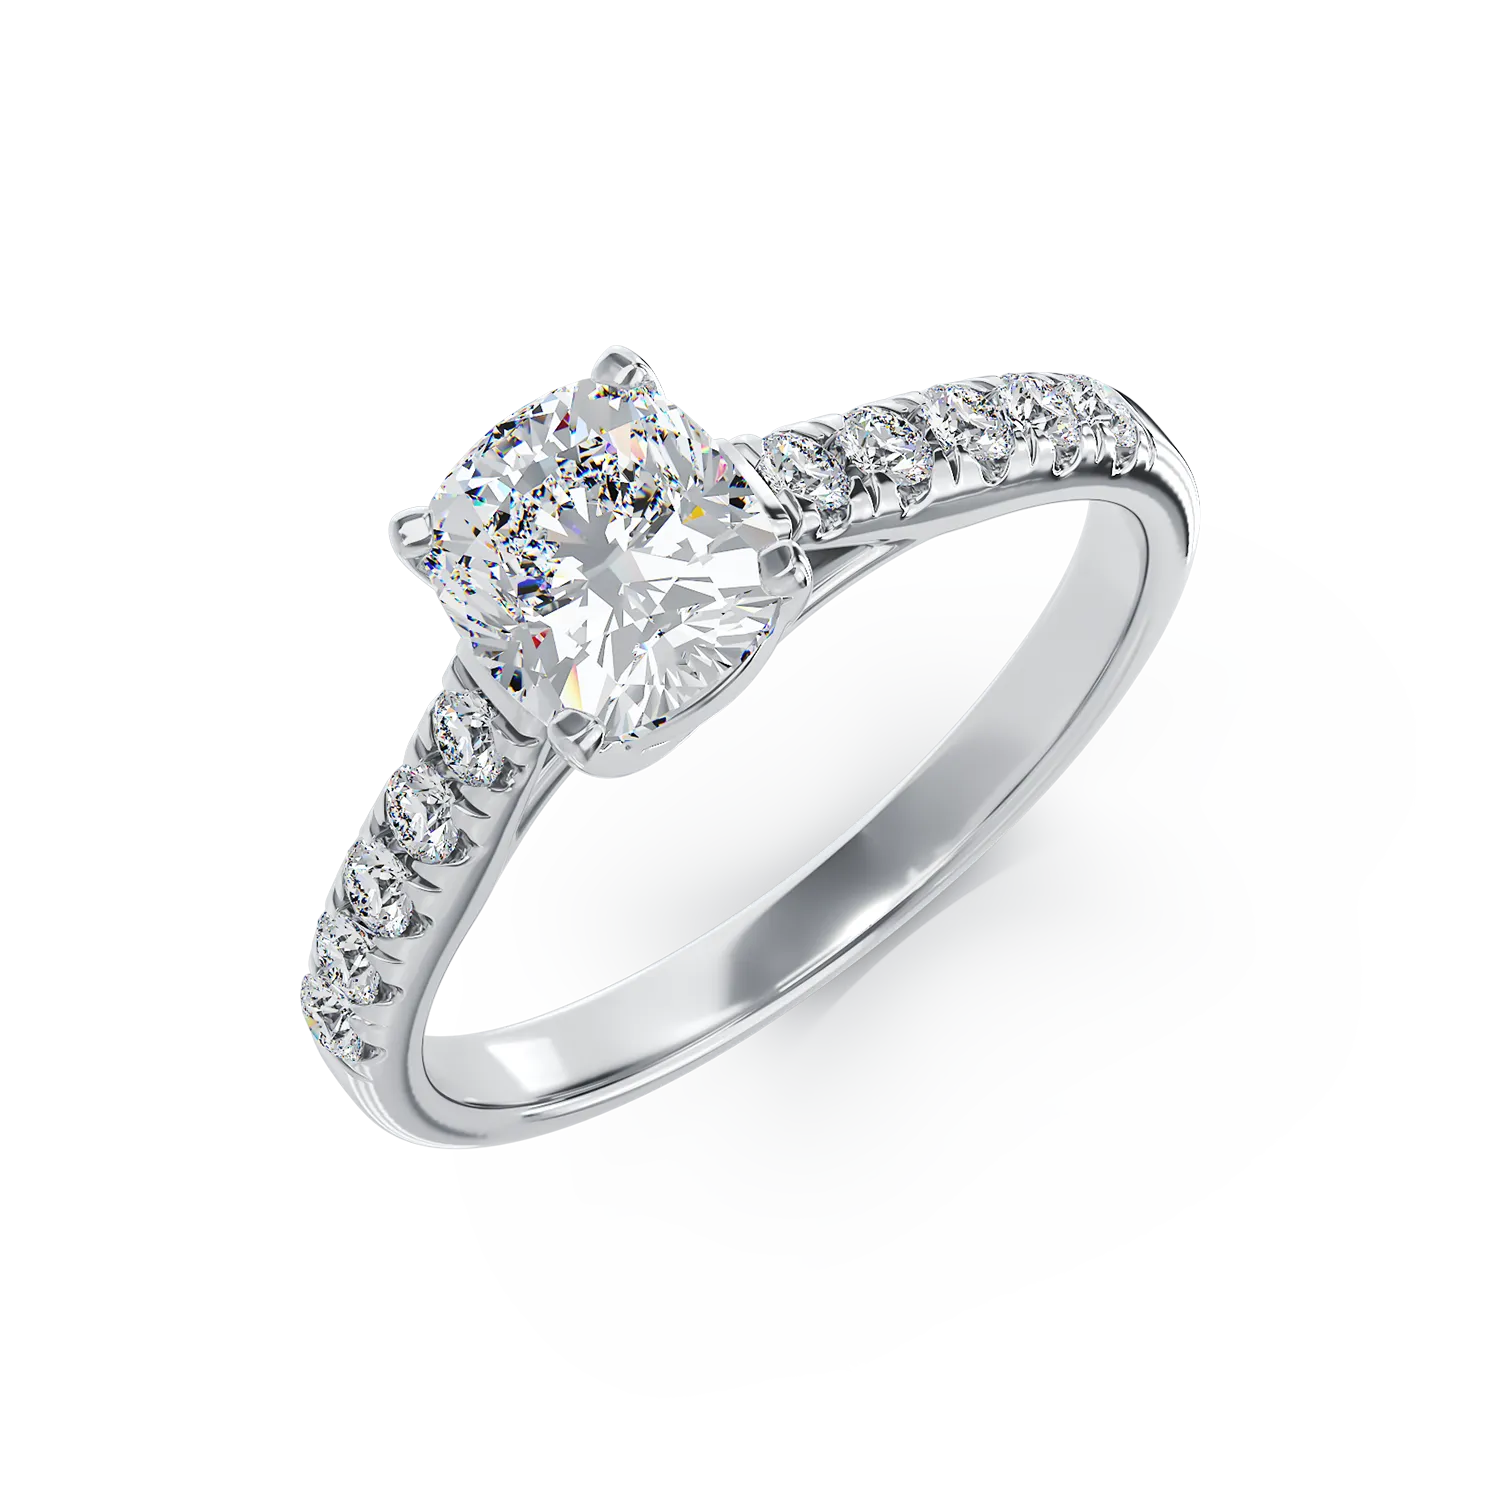 18K white gold engagement ring with 0.94ct diamond and 0.22ct diamonds